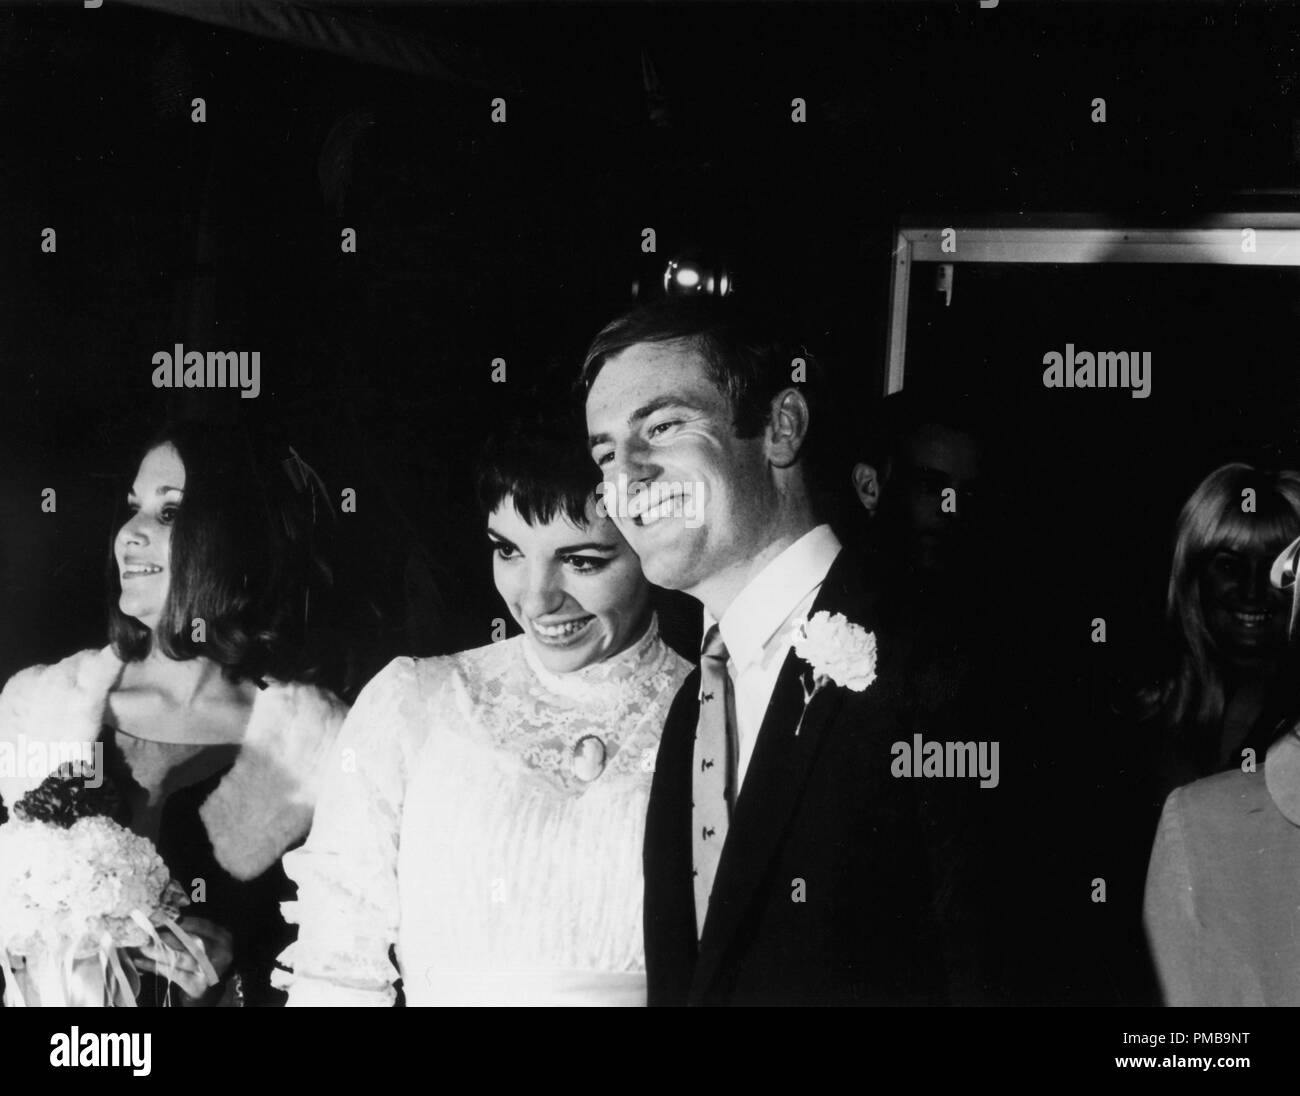 Liza Minnelli and Peter Allen at their wedding, March 3, 1967  File Reference # 32557_905THA Stock Photo